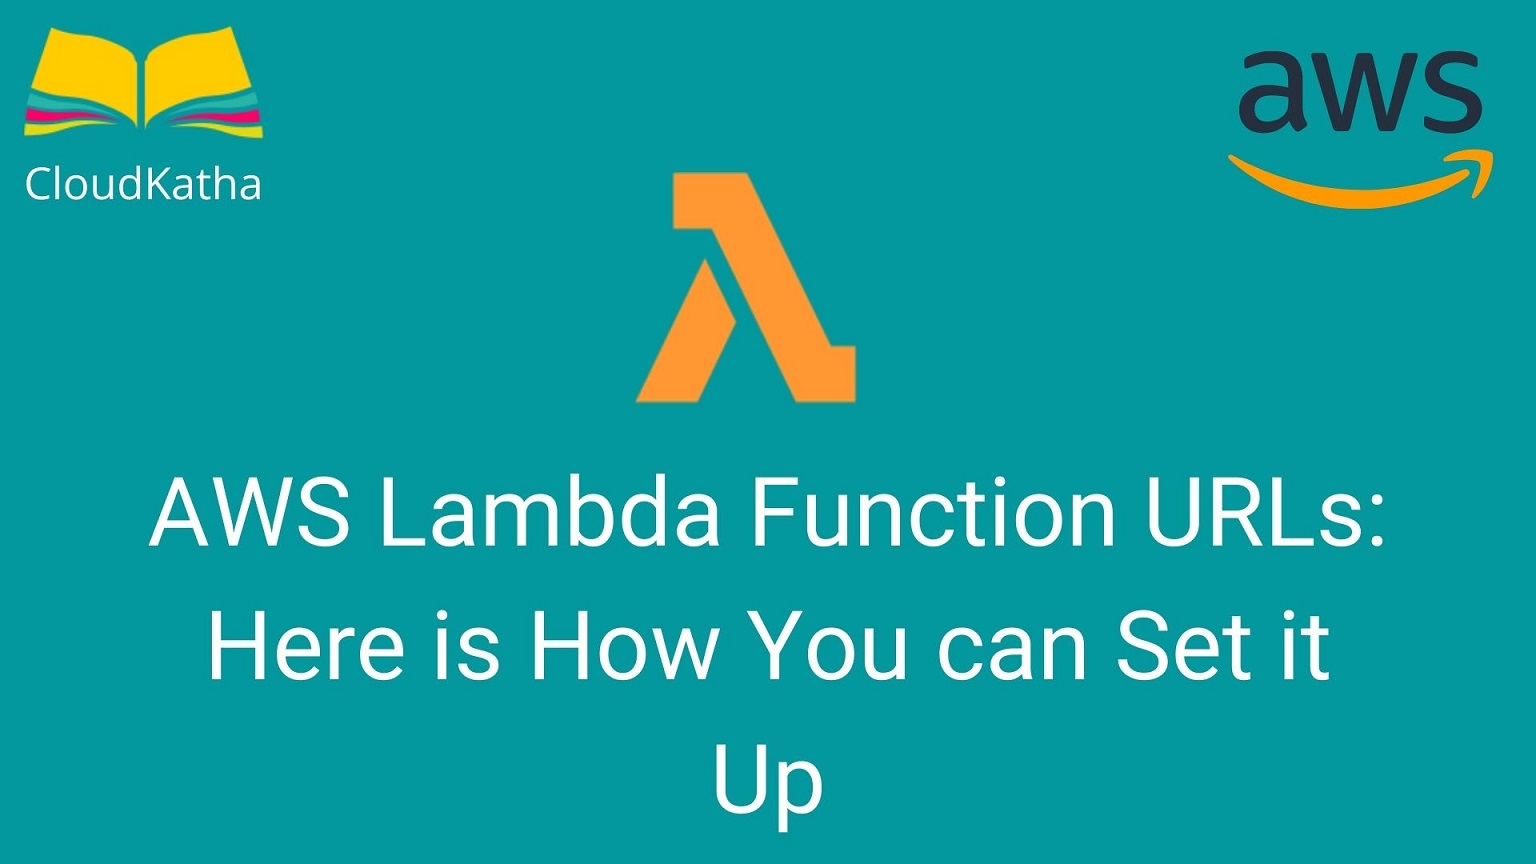 AWS Lambda Function URLs: Here is How You can Set it Up